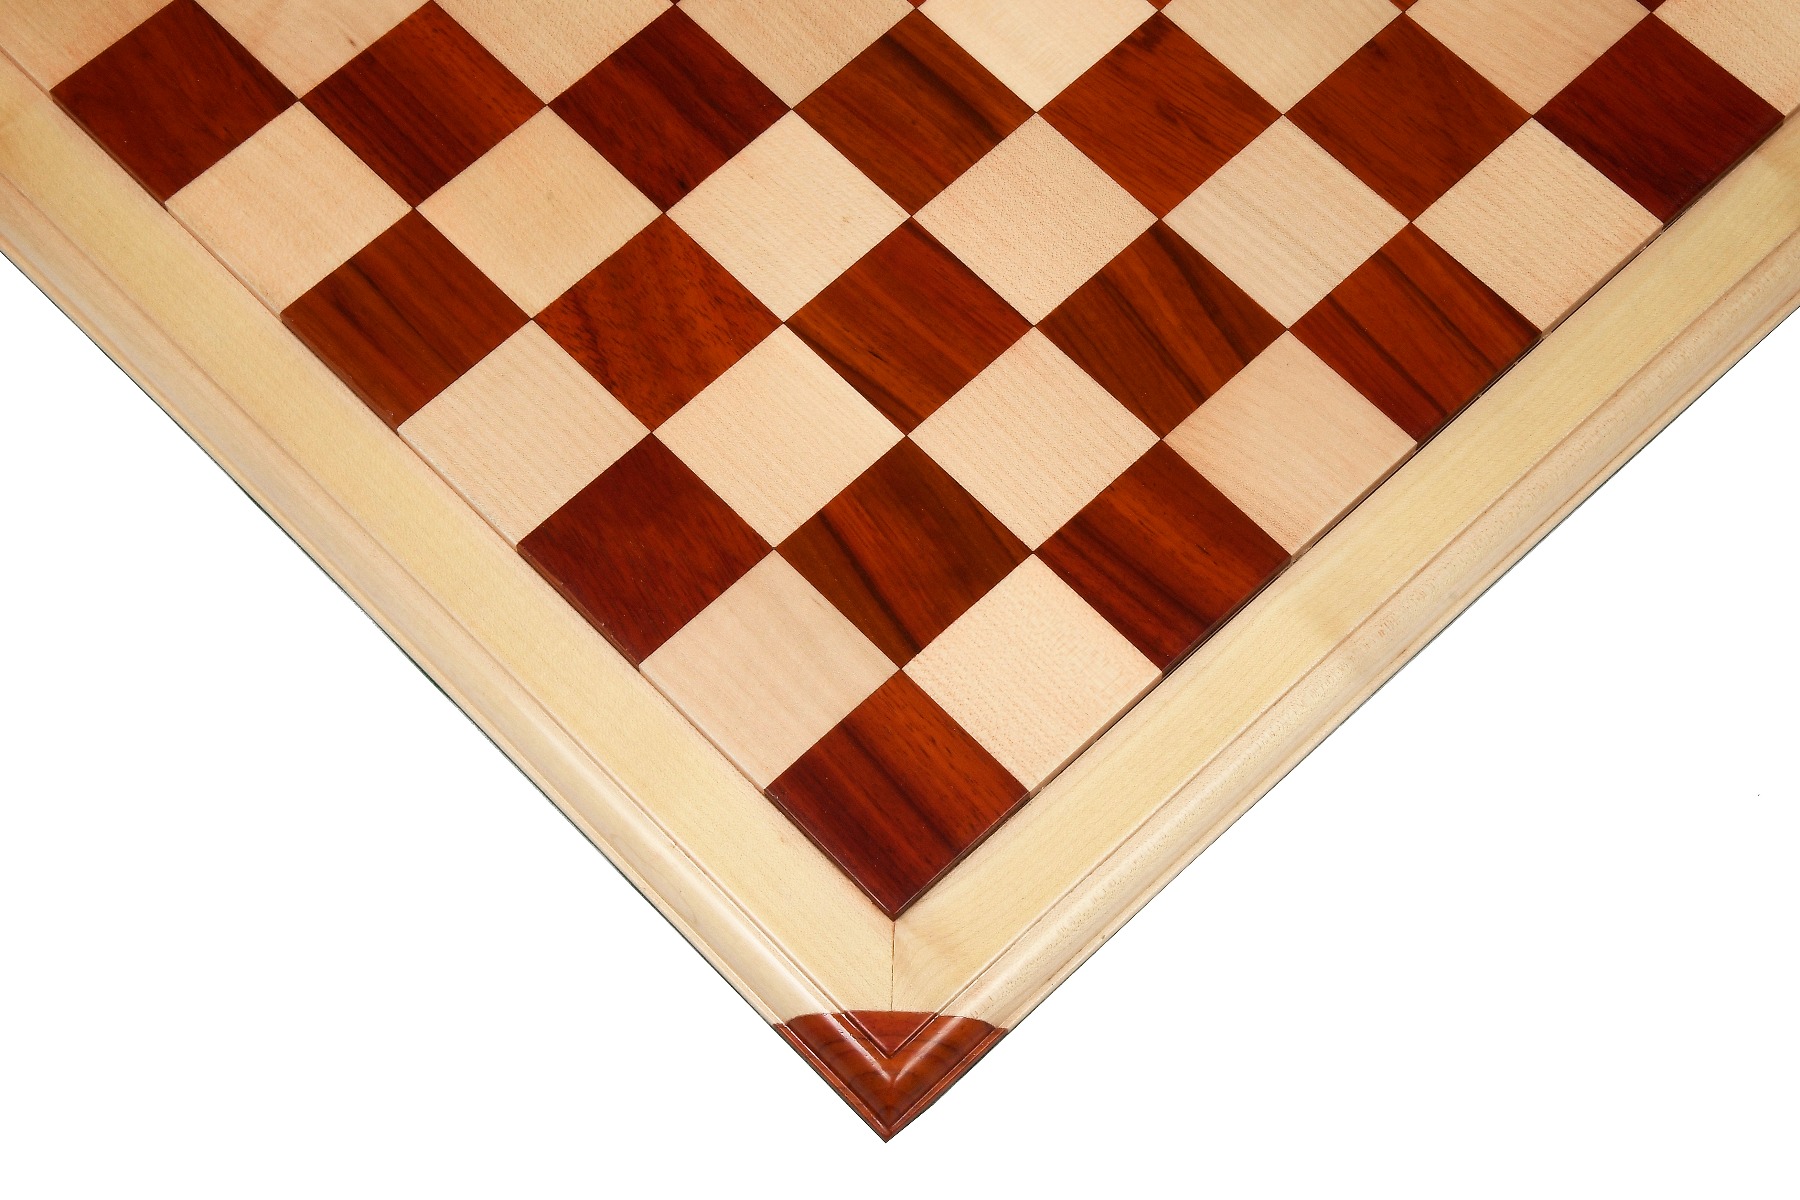 21" Wooden Chess Board Bud Rose Wood & Maple with 2.25" Sq Hand Carved CROSS 